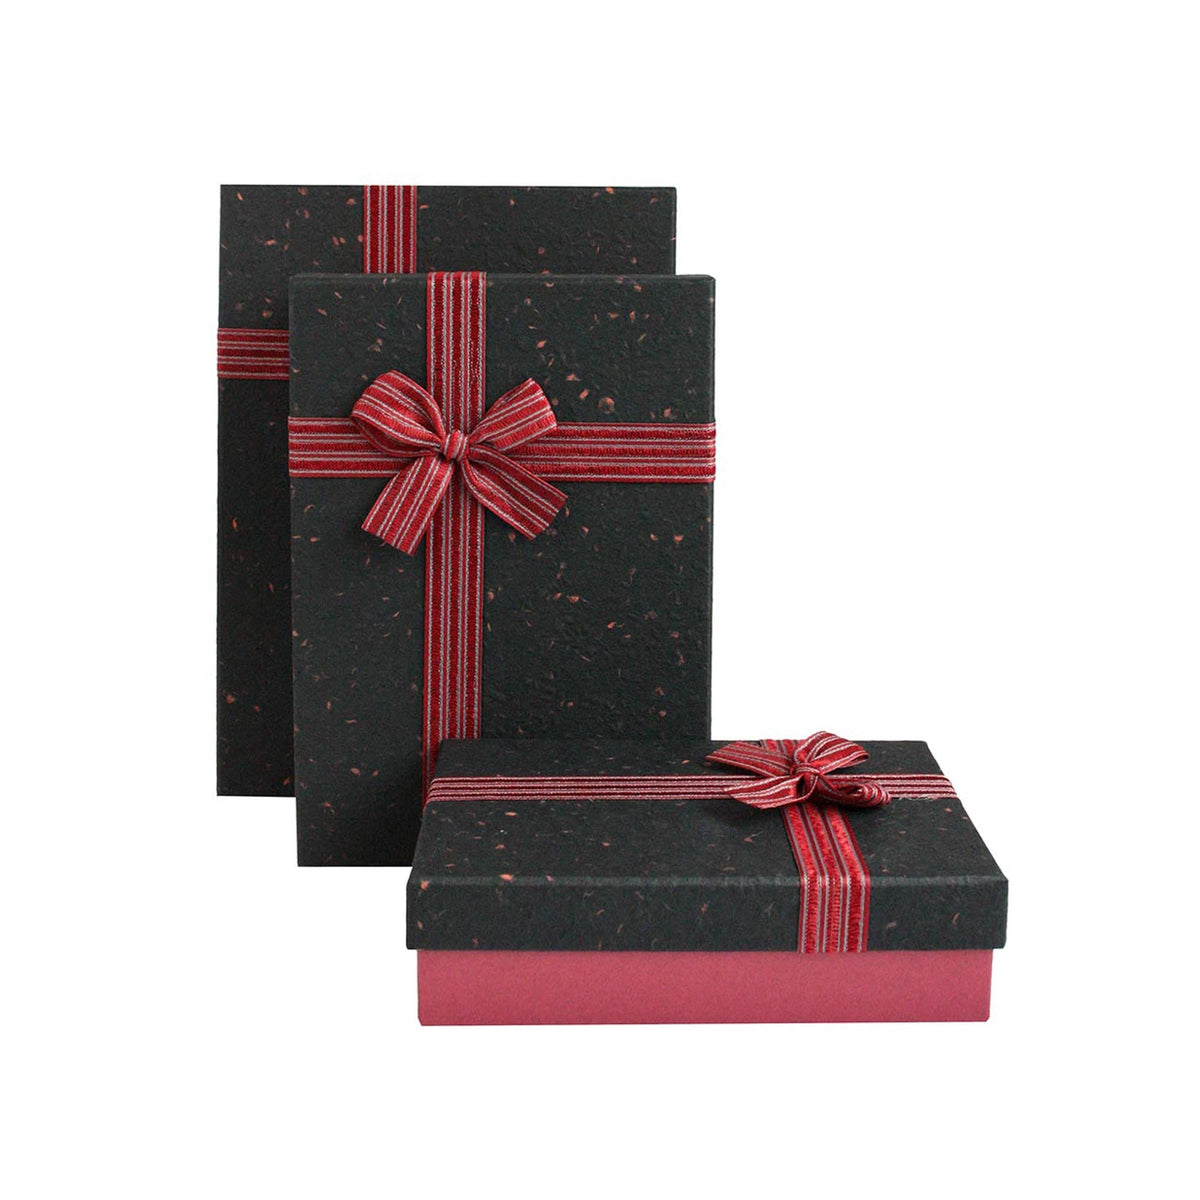 Set of 3 Burgundy/Black Gift Boxes With Red Striped Ribbon